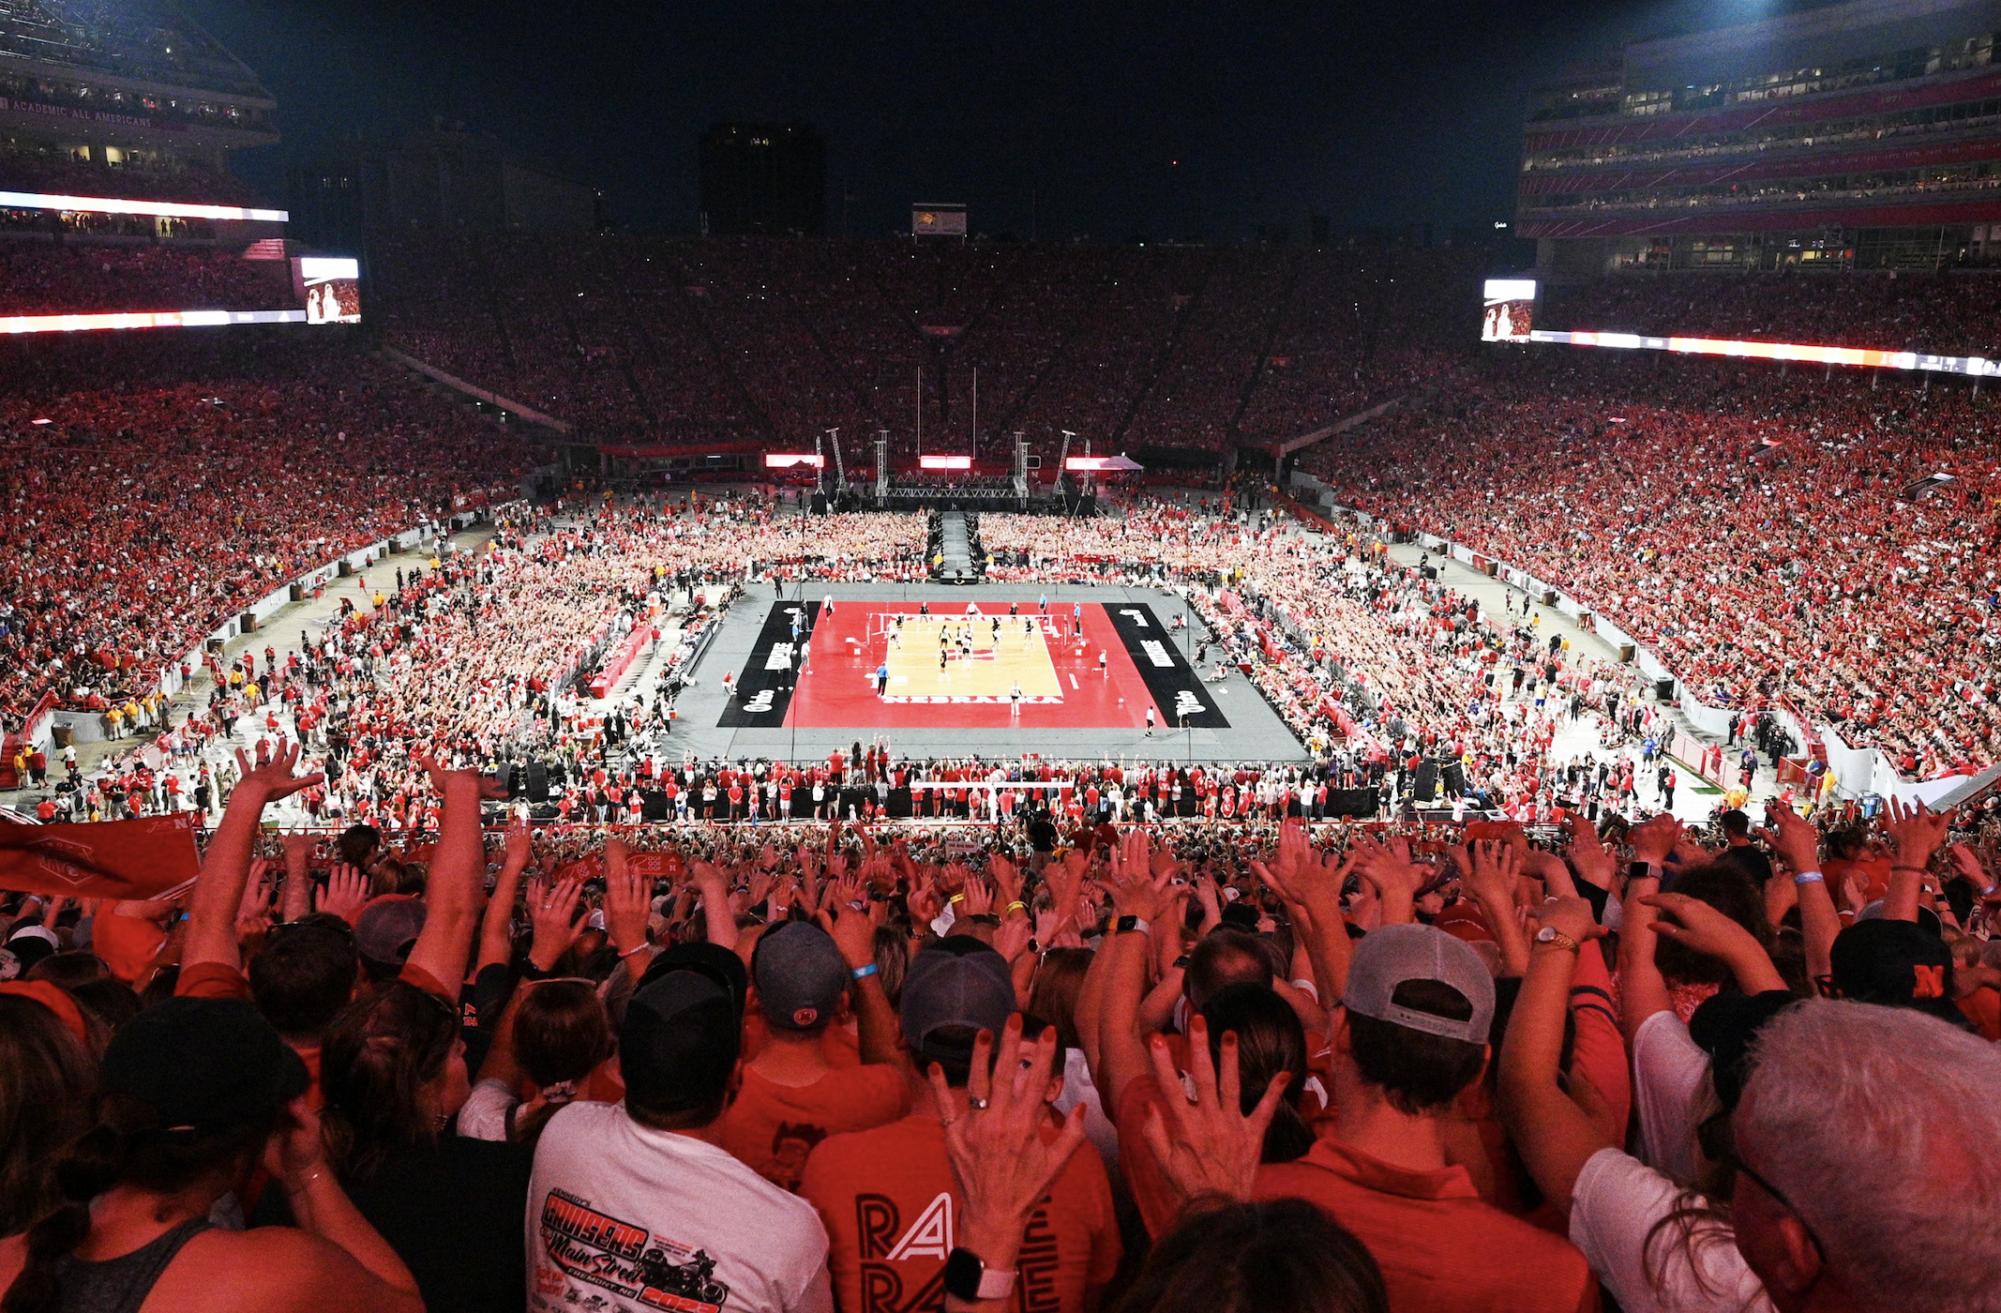 View of attendance record-breaking Volleyball game (85,458 people). 

Credit: NBC News

